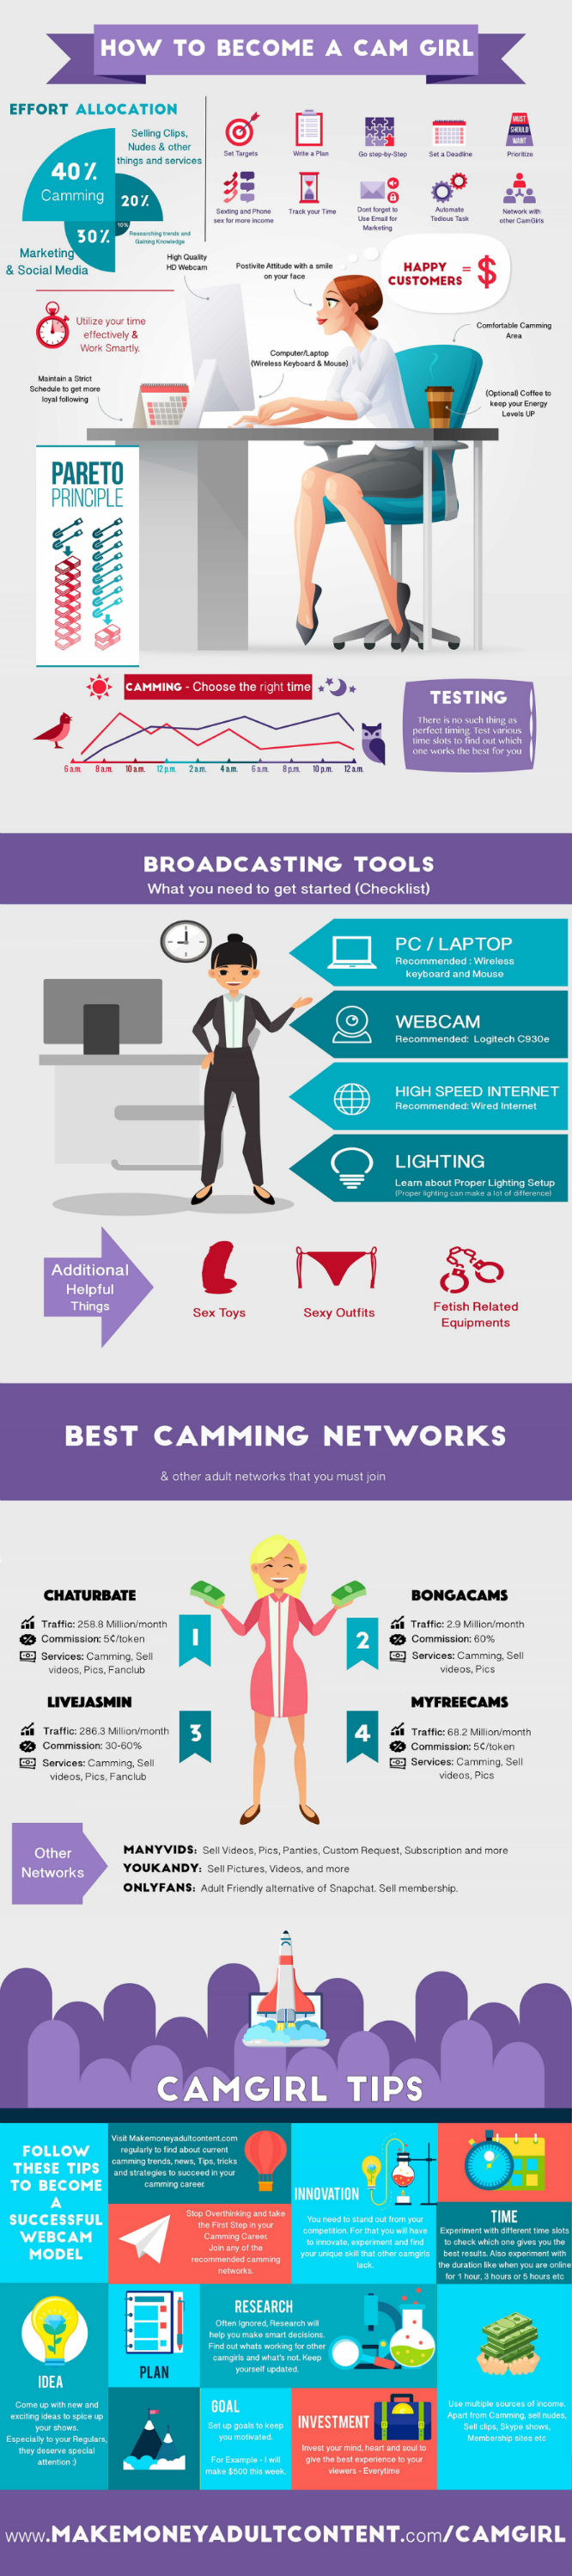 Full infographic- how to become a cam girl.